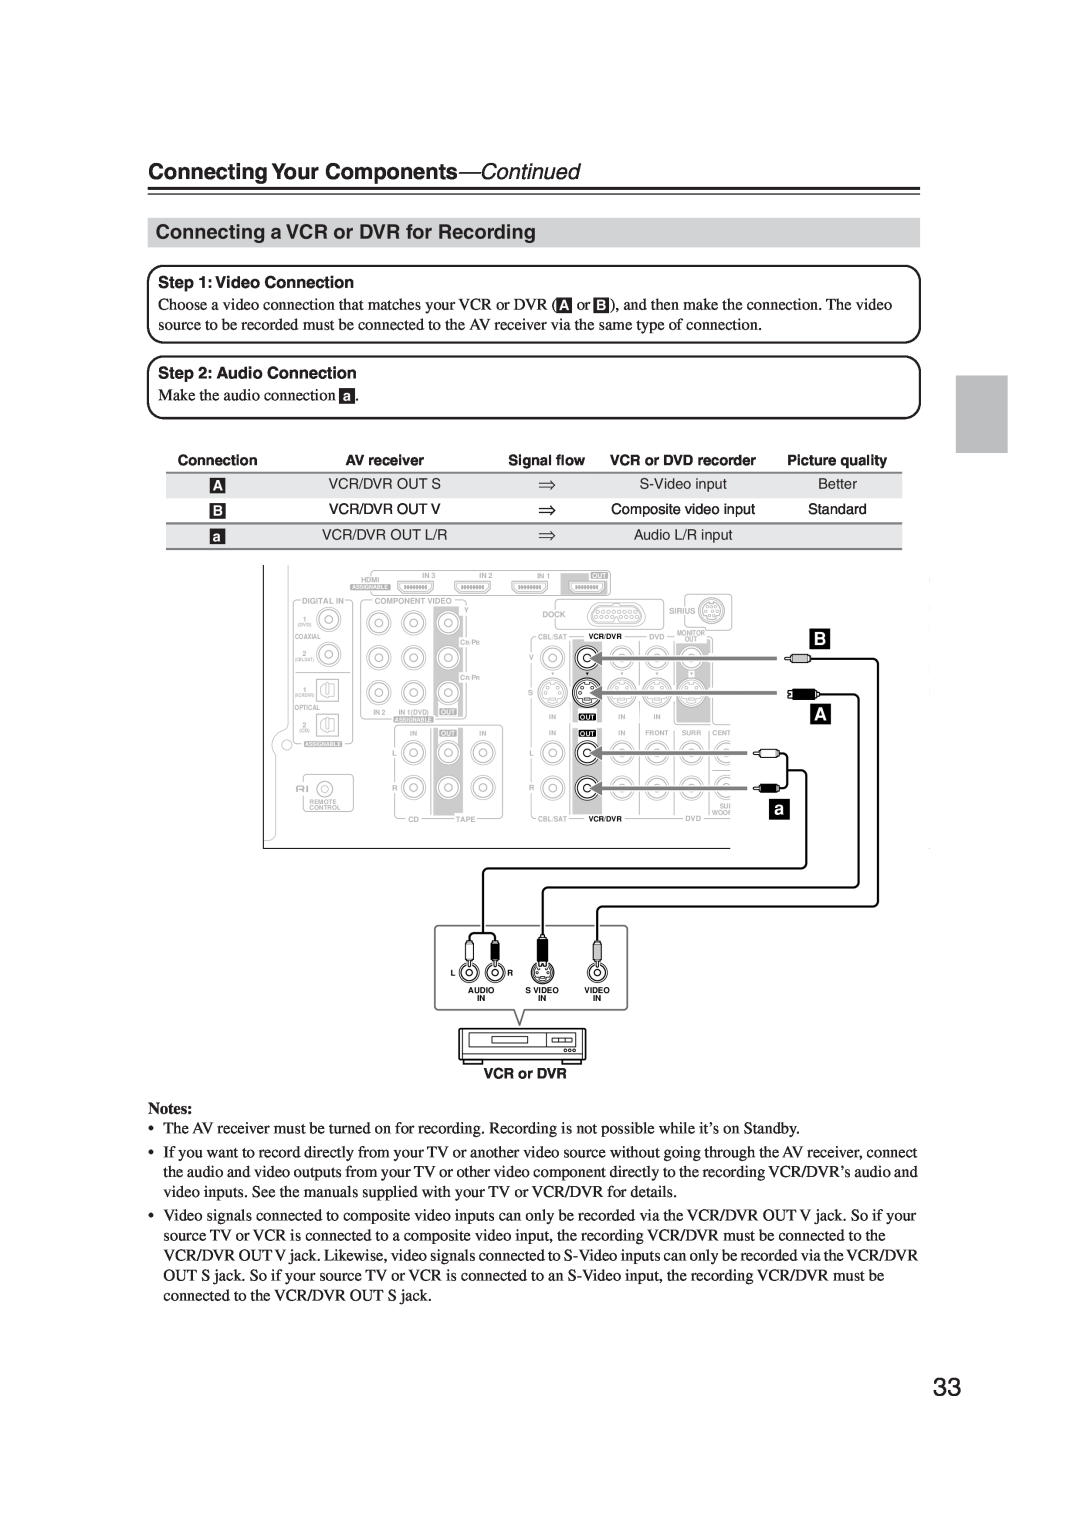 Onkyo S5100 instruction manual Connecting a VCR or DVR for Recording, Connecting Your Components—Continued, Notes 